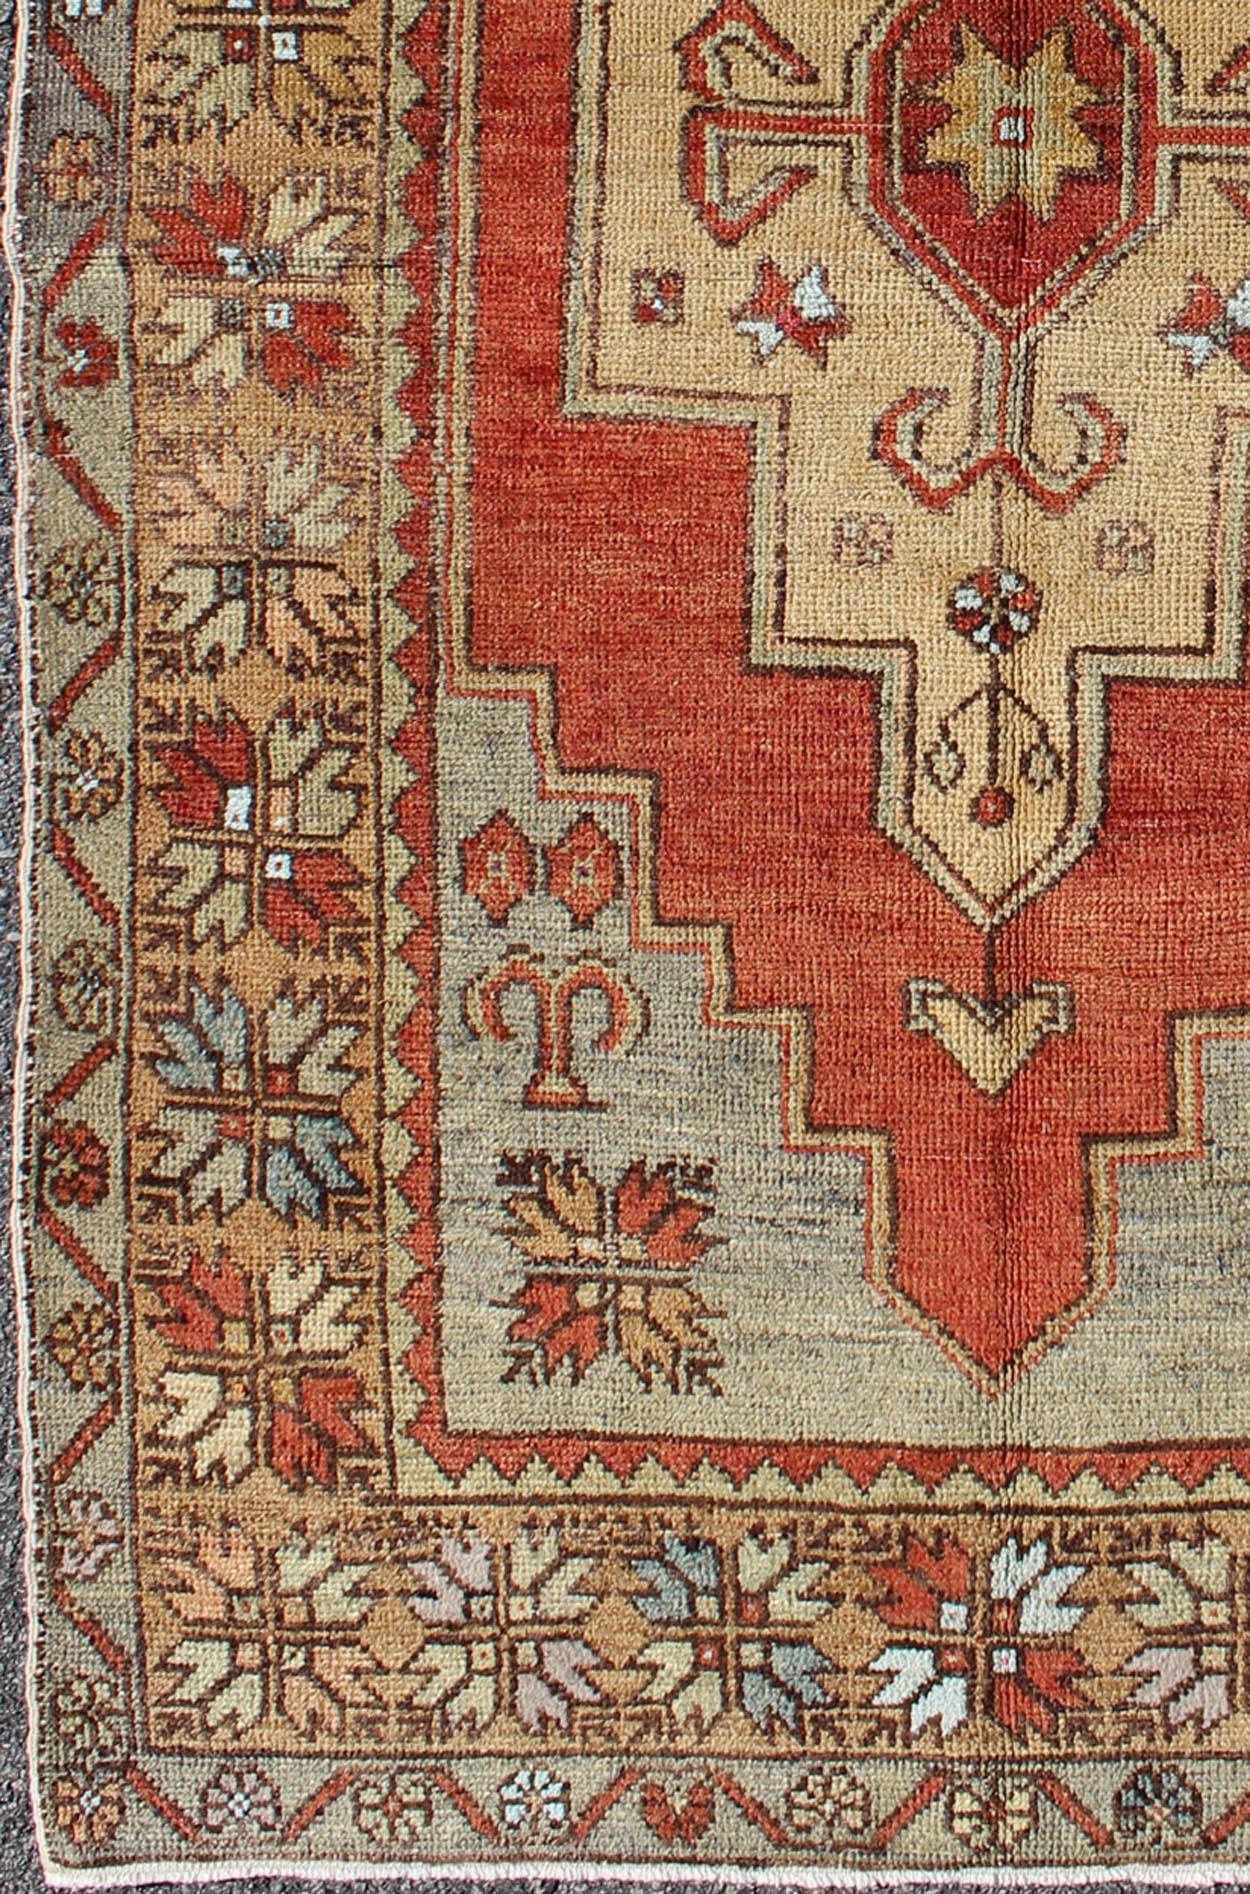 Oushak vintage rug from turkey with medallion design and large border, rug TU-TRS-129443, country of origin / type: Turkey / Oushak, circa 1940

This vintage Turkish Oushak rug features a singular medallion design. The layered medallion is